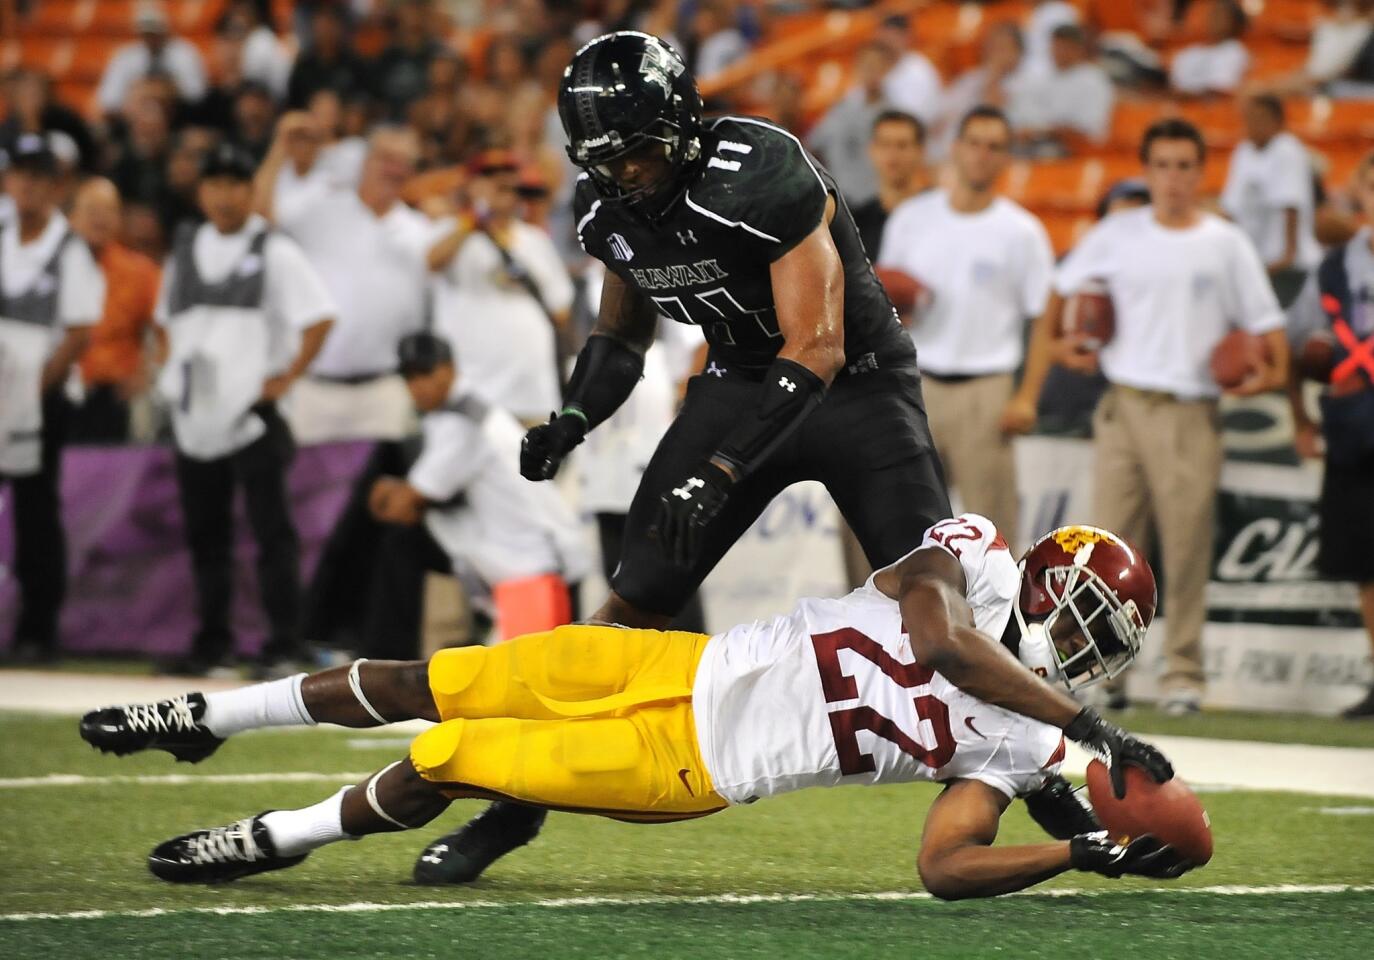 Trojans running back Justin Davis dives into the end zone before Hawaii's Tavita Woodard can stop him from scoring in the fourth quarter Thursday night at Aloha Stadium in Honolulu.